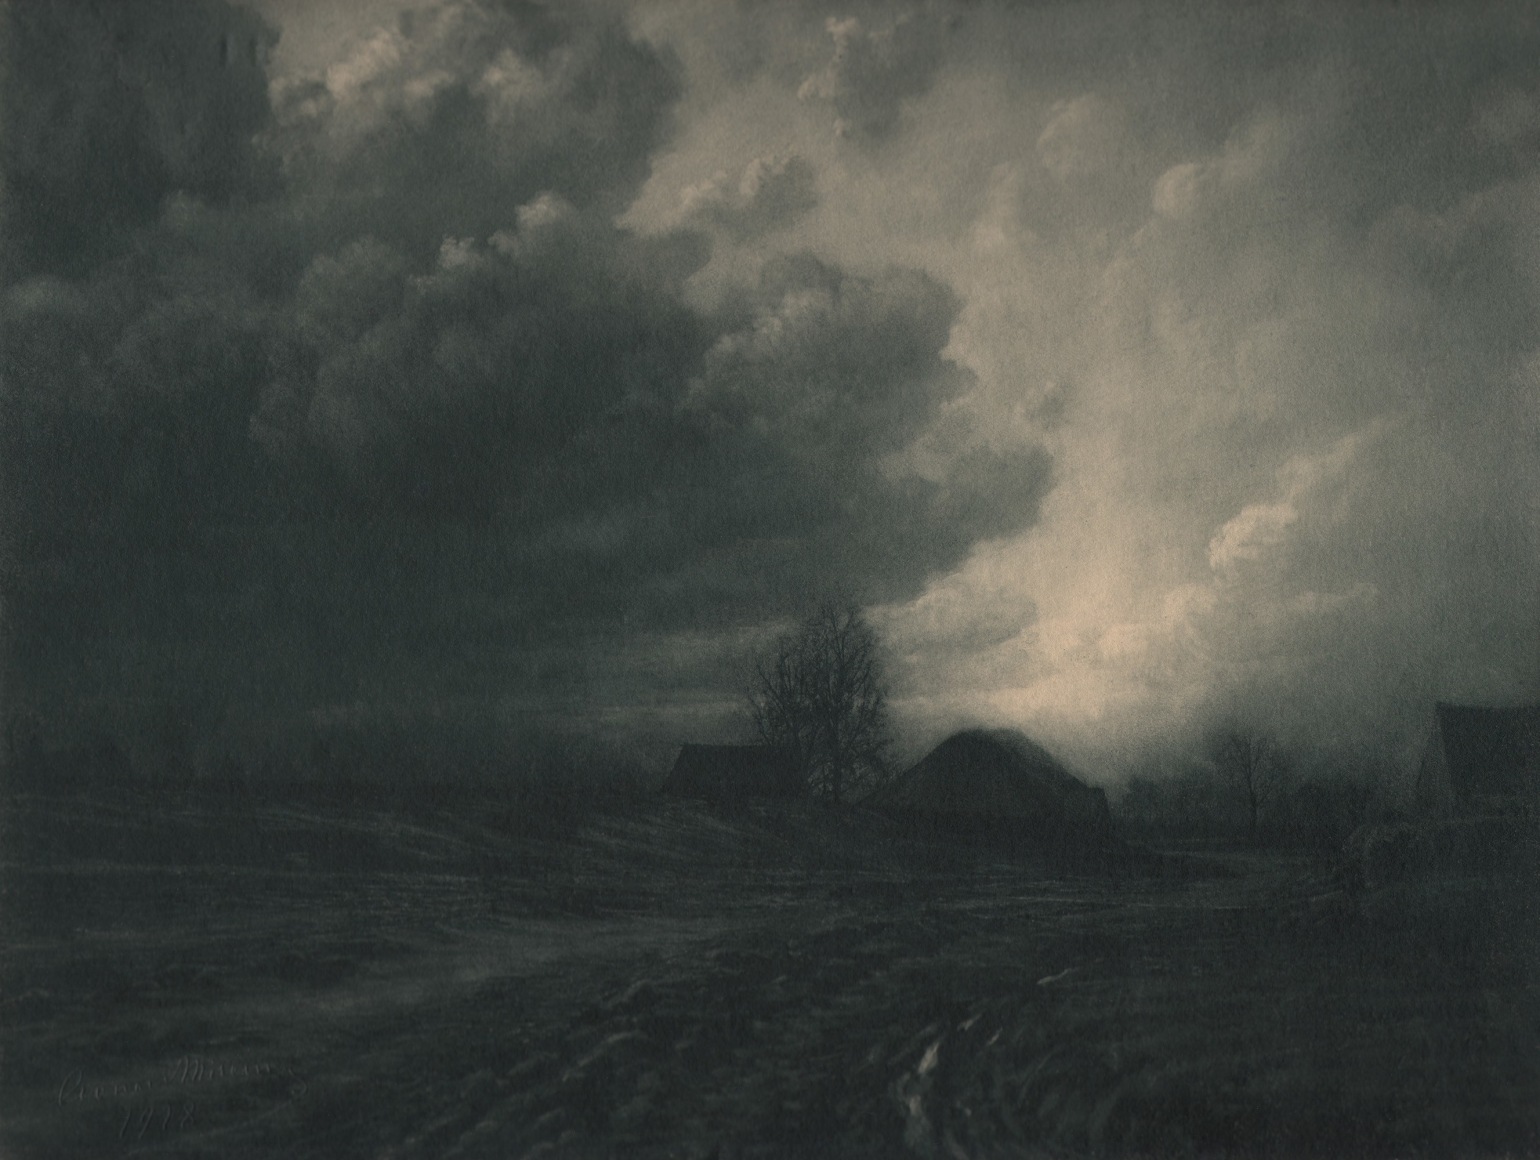 17. L&eacute;onard Misonne, Cumulus, 1928. Rural landscape with 2/3 of the frame occupied by clouds in dim light. Gray/green-toned print.